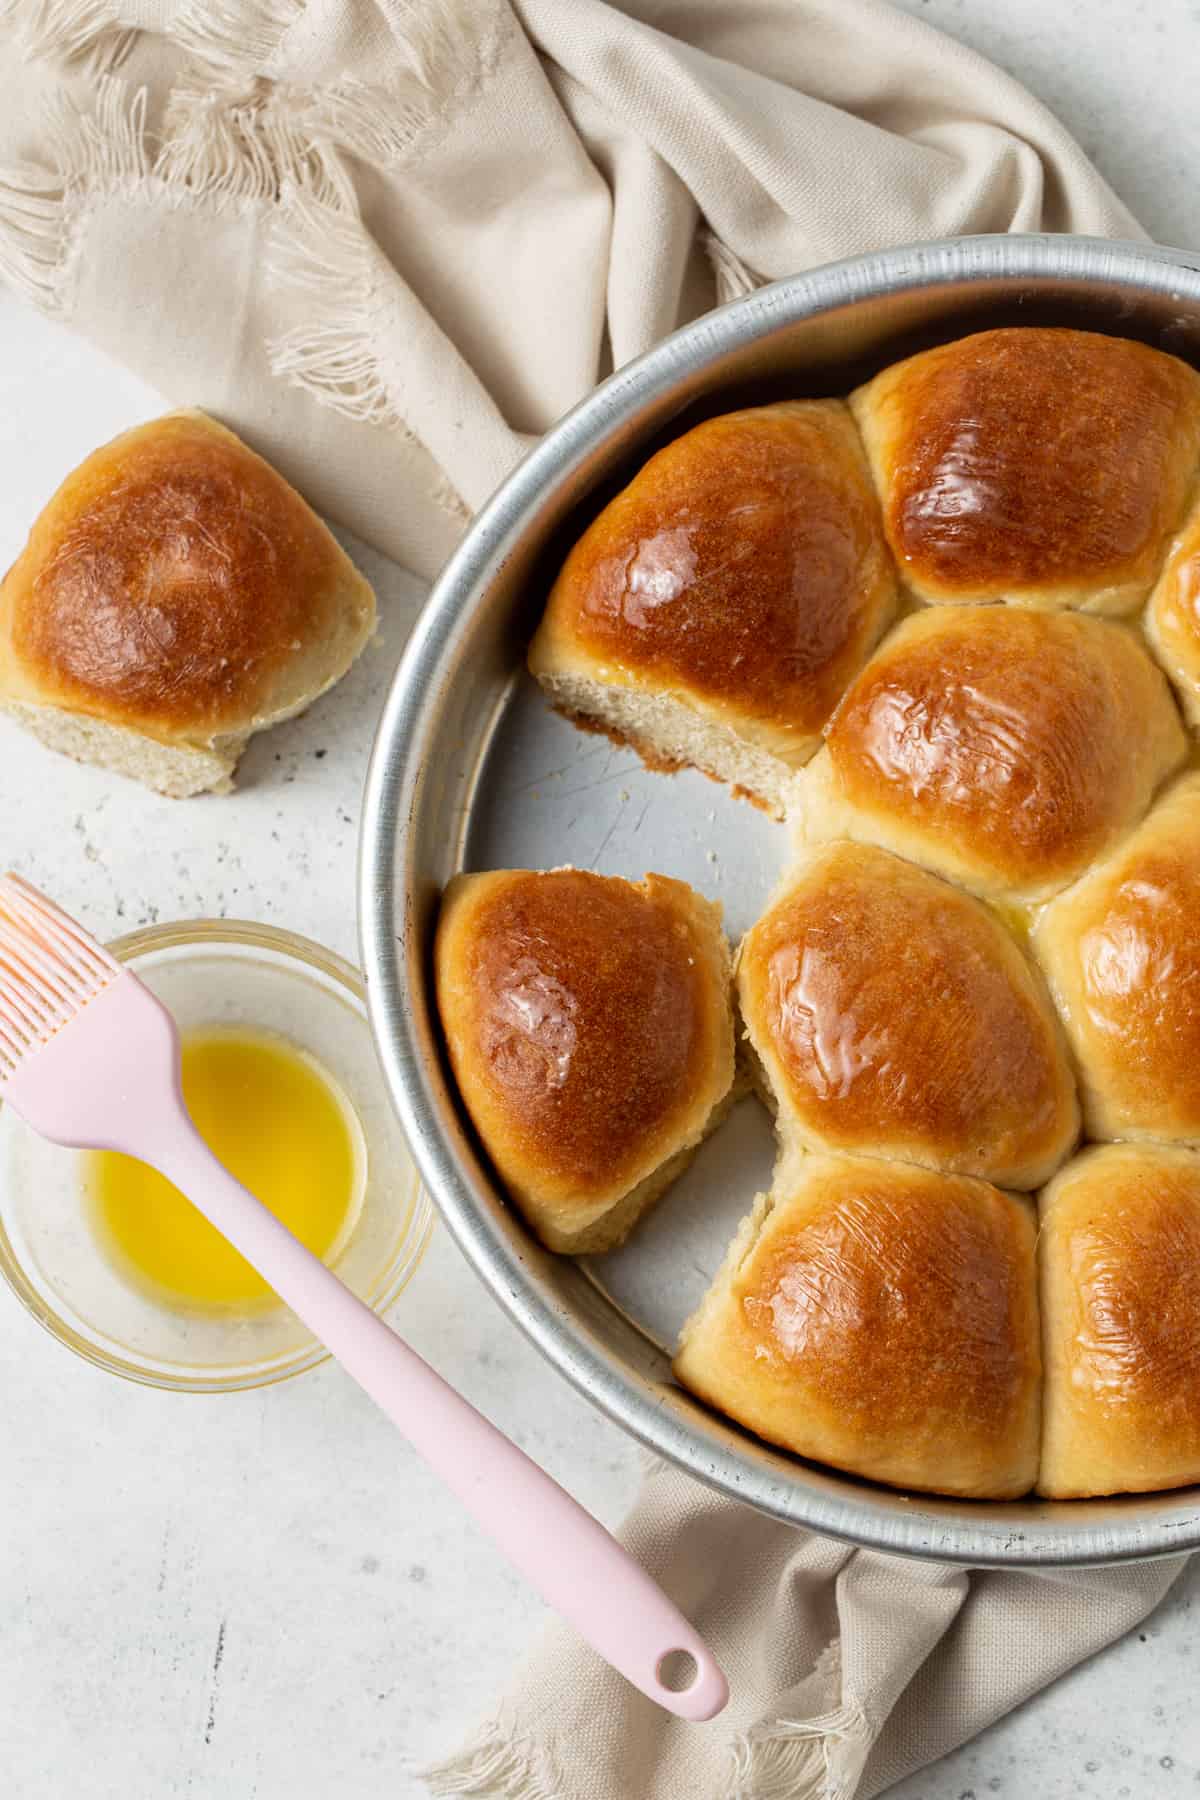 Baked rolls in cake pan with pastry brush and melted butter.